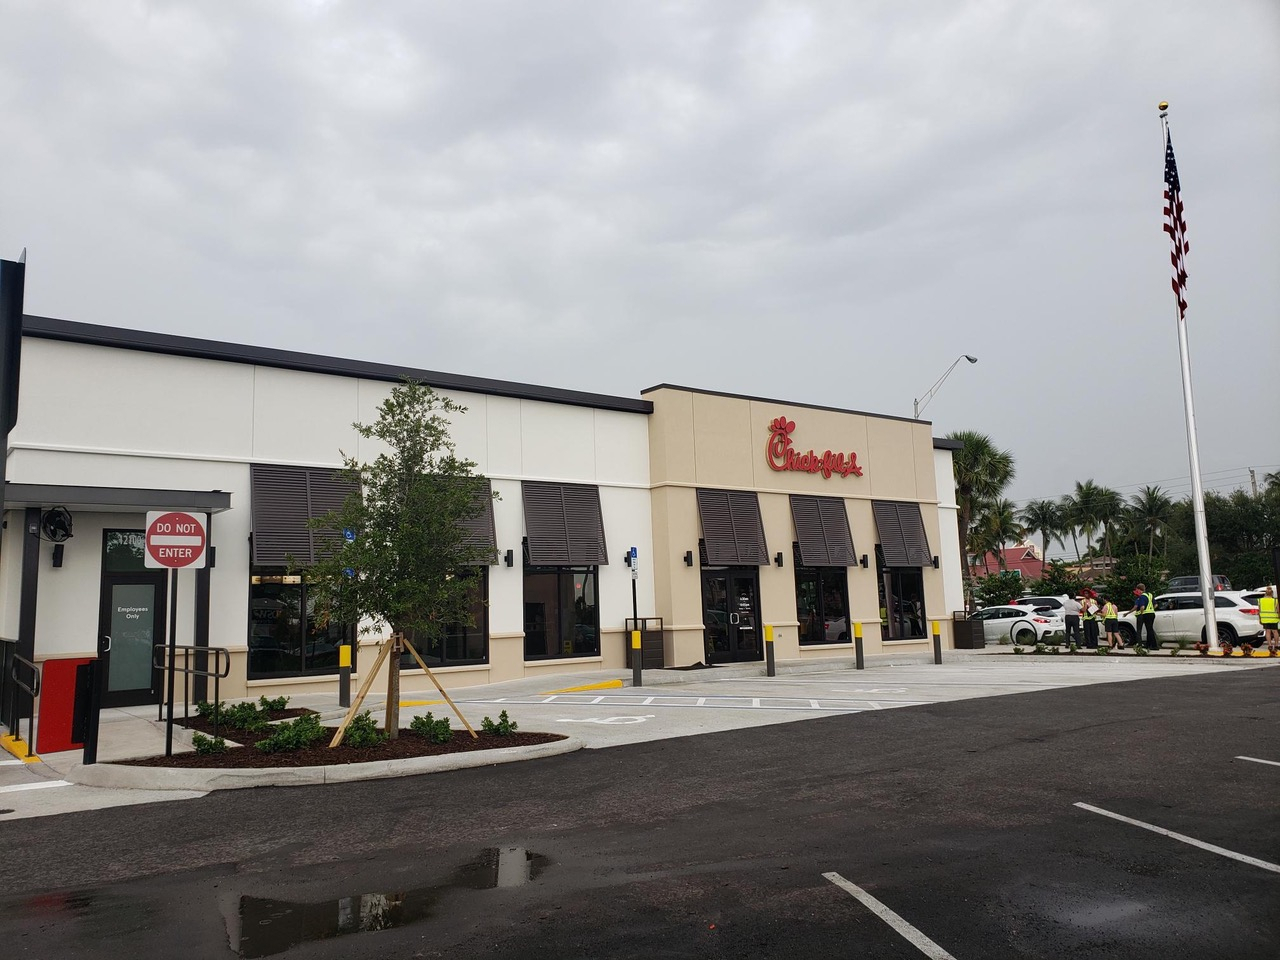 Chick-Fil-A Opens New Miami Restaurant On June 10 - The